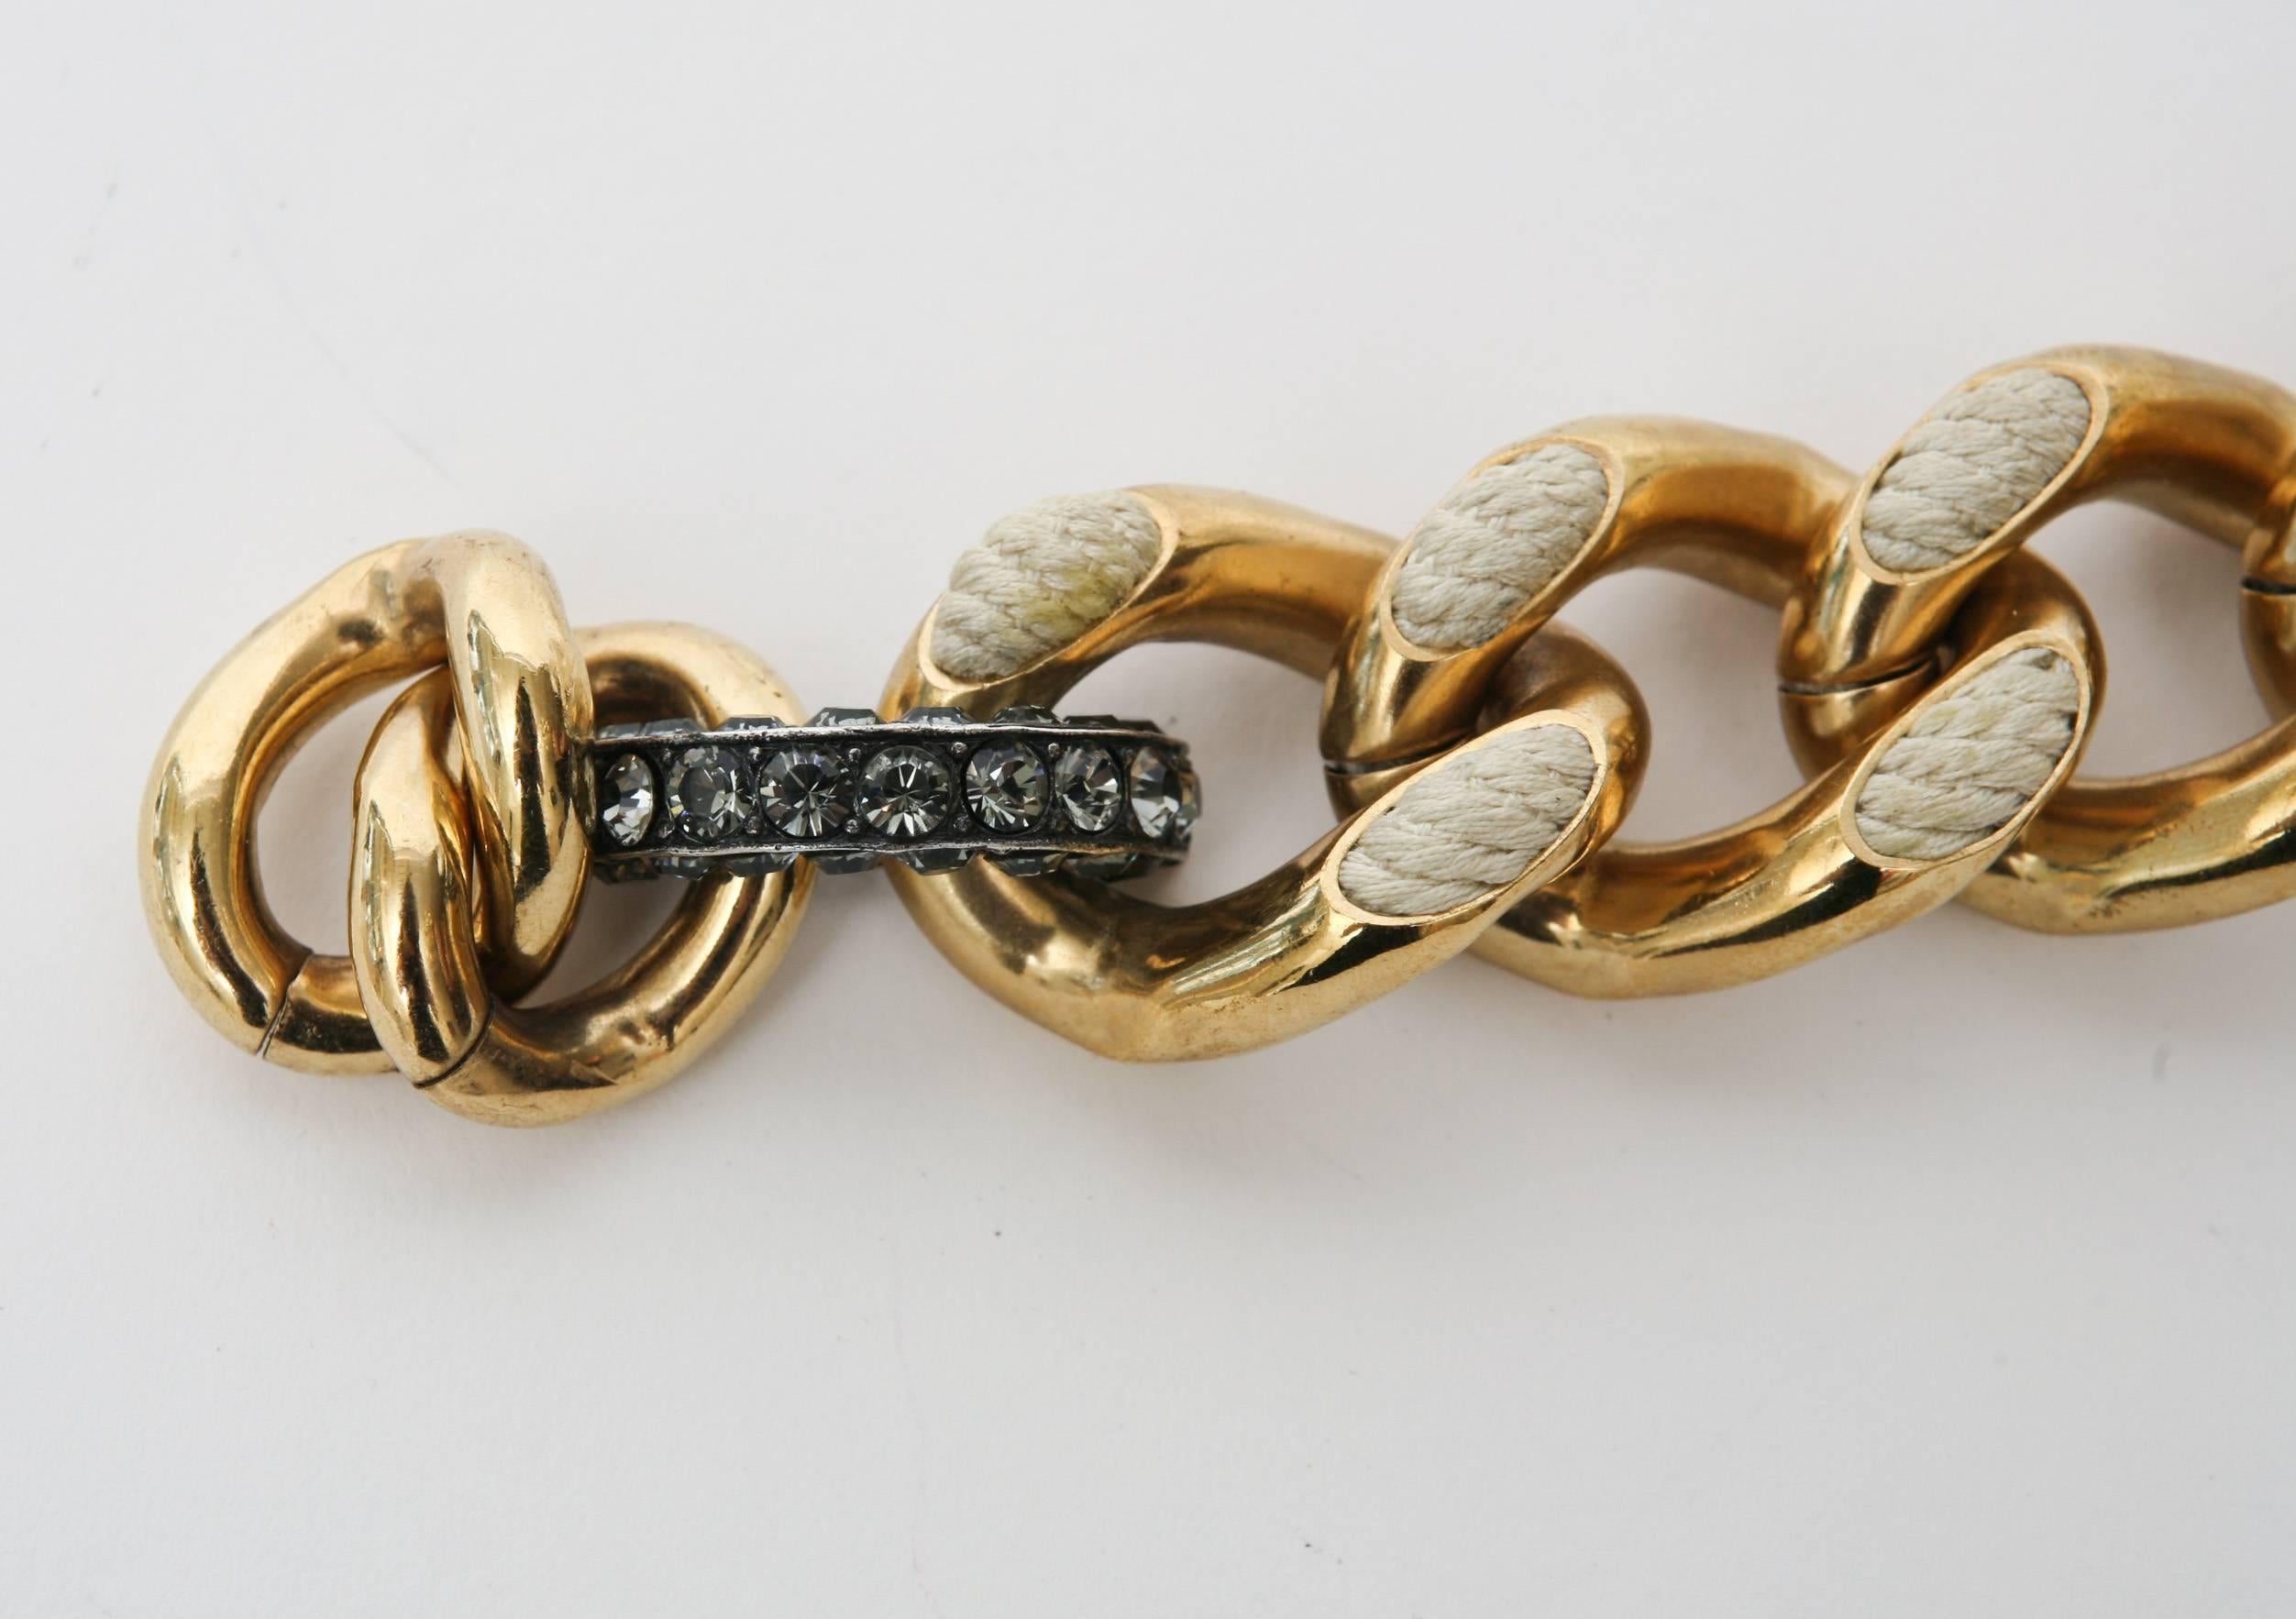 This never worn spectacular chic Albar Elbaz Lanvin tagged gold plated link/chain bracelet
has many components to it.It is off white braided rope raised resin mixed in with dark blue Swaroski dark blue crystals as the toggle clasp and a pin like bar